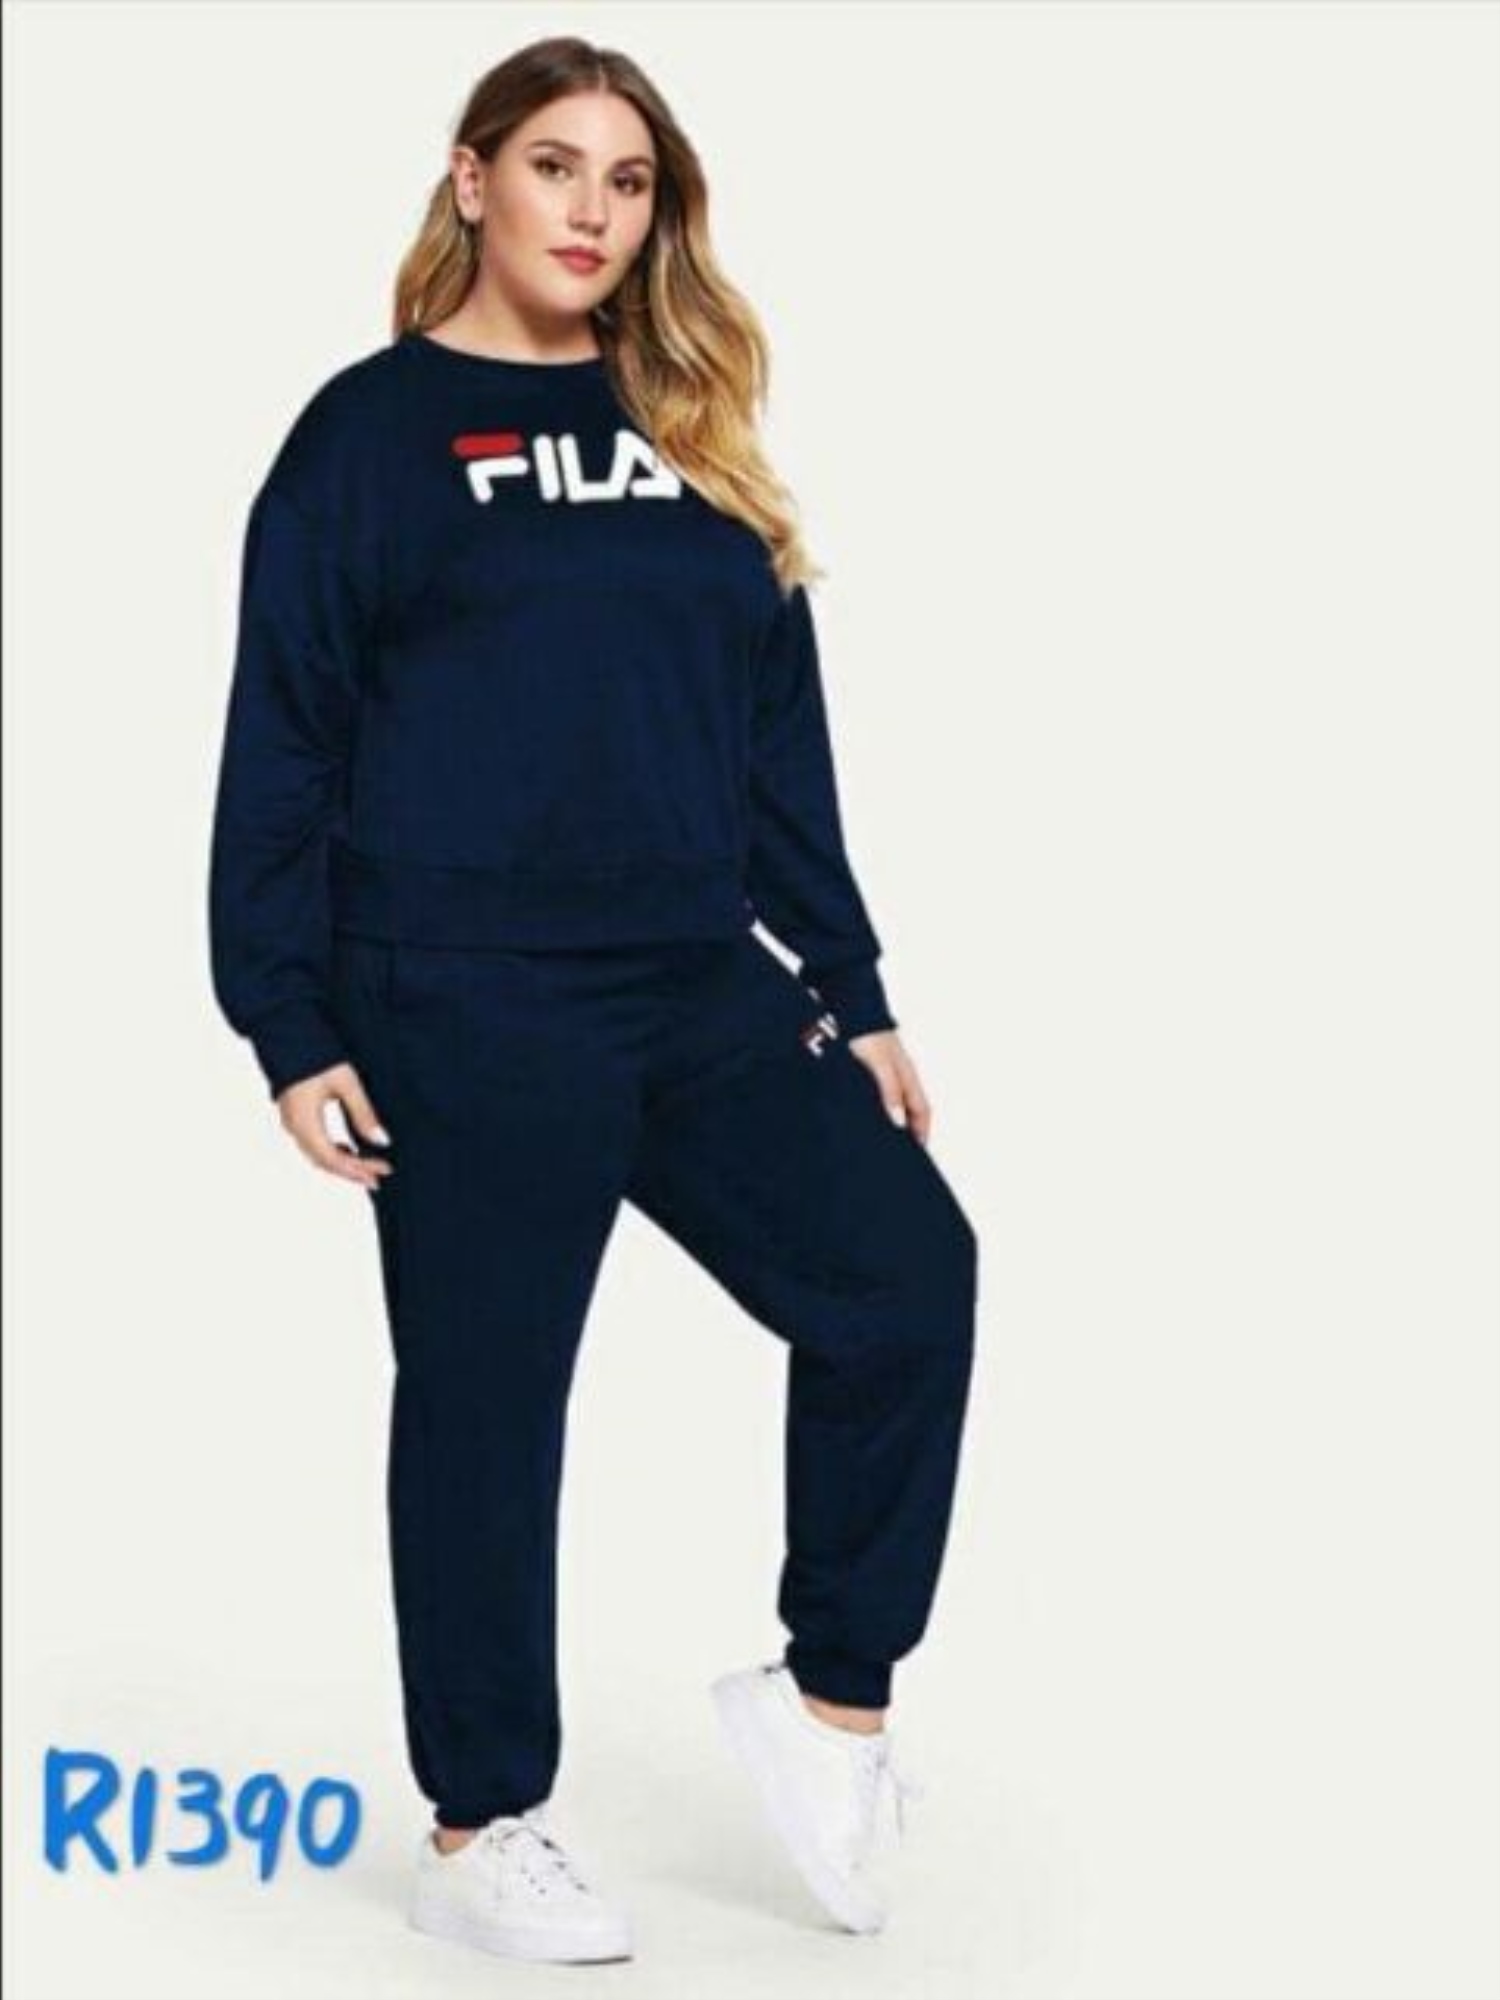 apparel - Shop fila apparel with great discounts prices online | Lazada Philippines